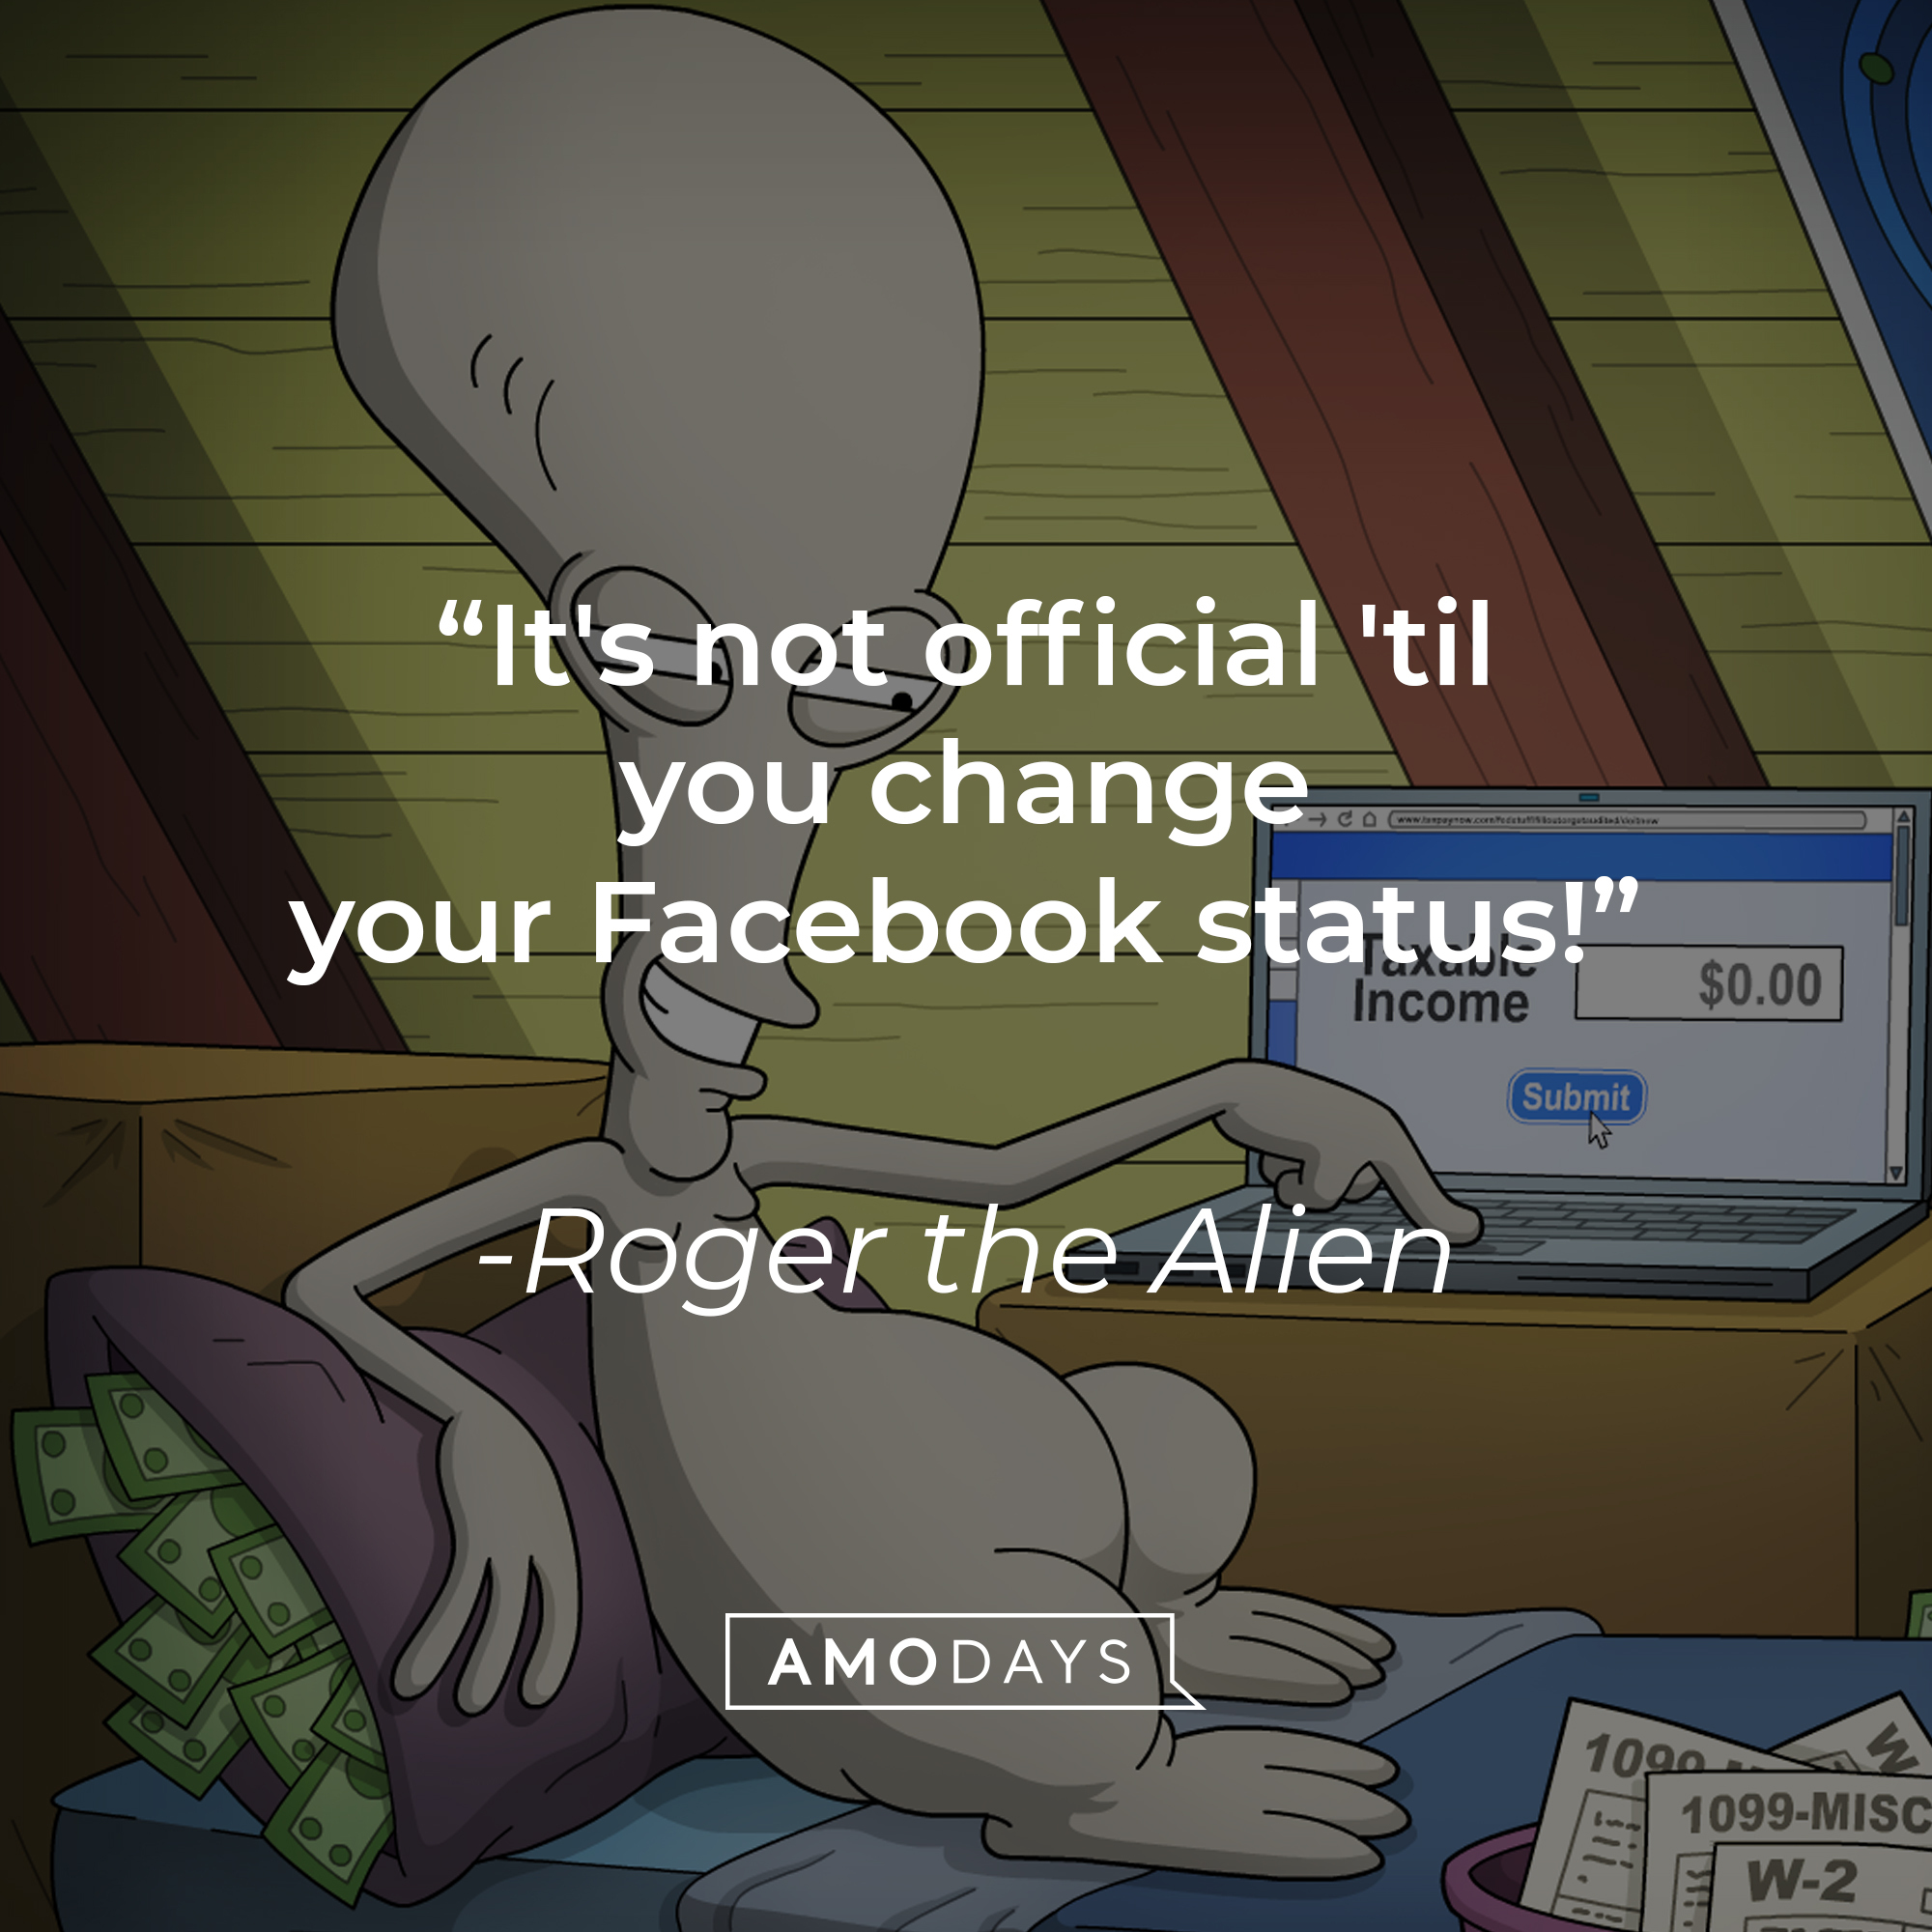 Roger the Alien with his quote: “It's not official 'til you change your Facebook status!” | Source: facebook.com/AmericanDad